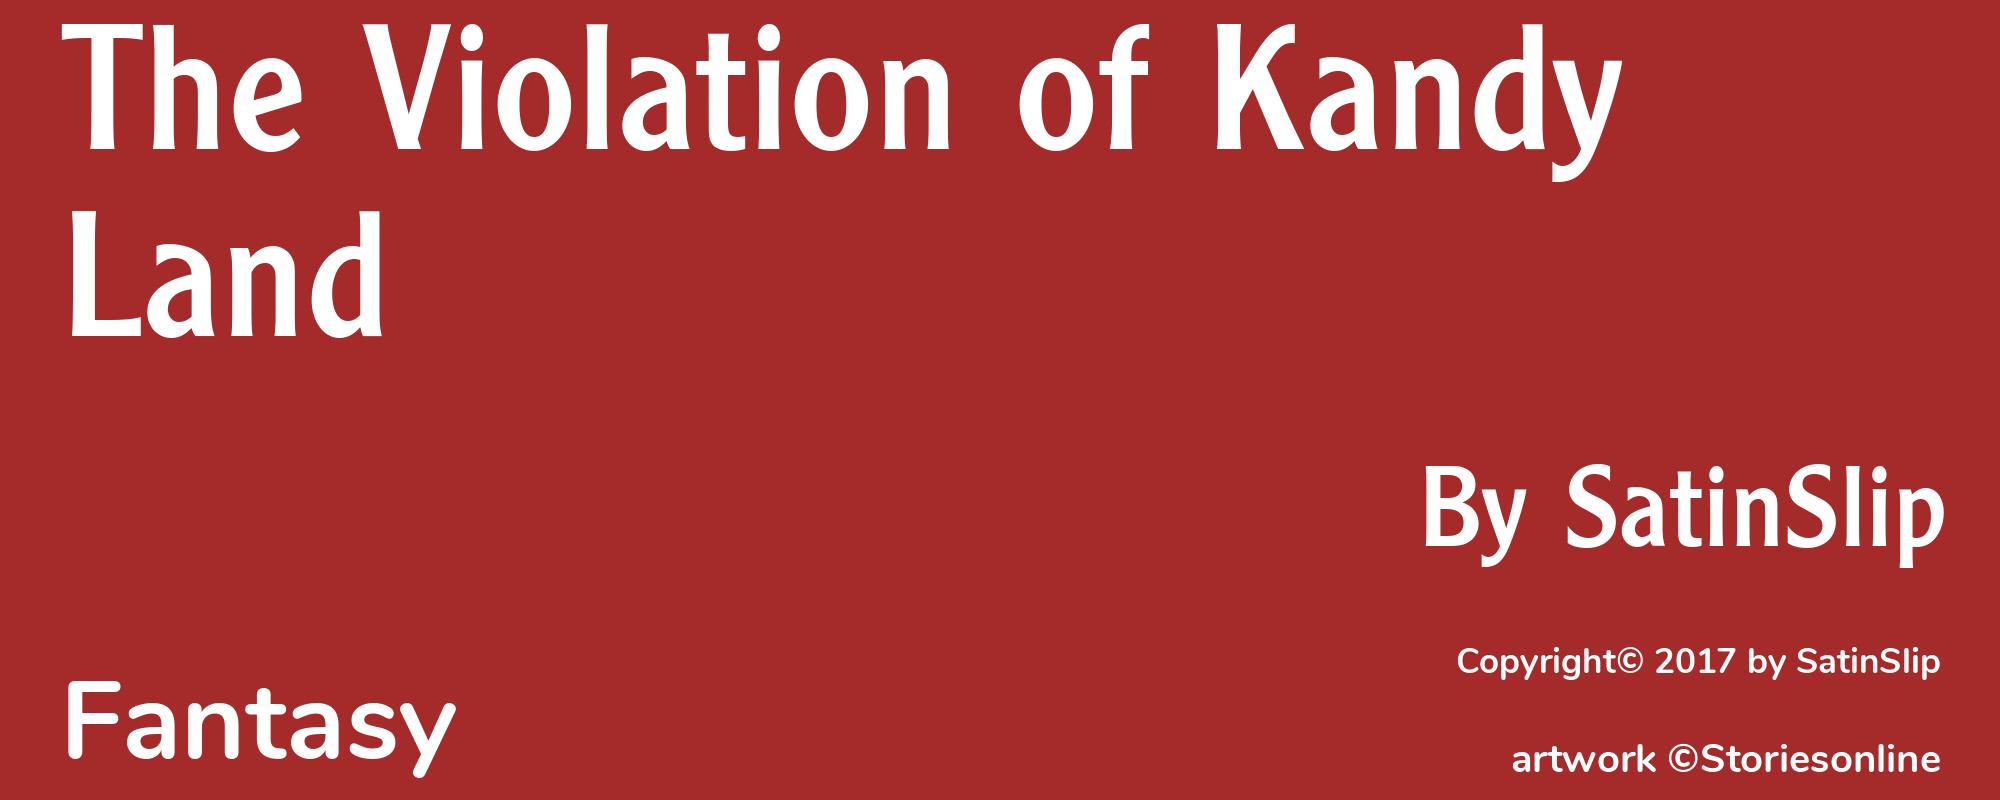 The Violation of Kandy Land - Cover